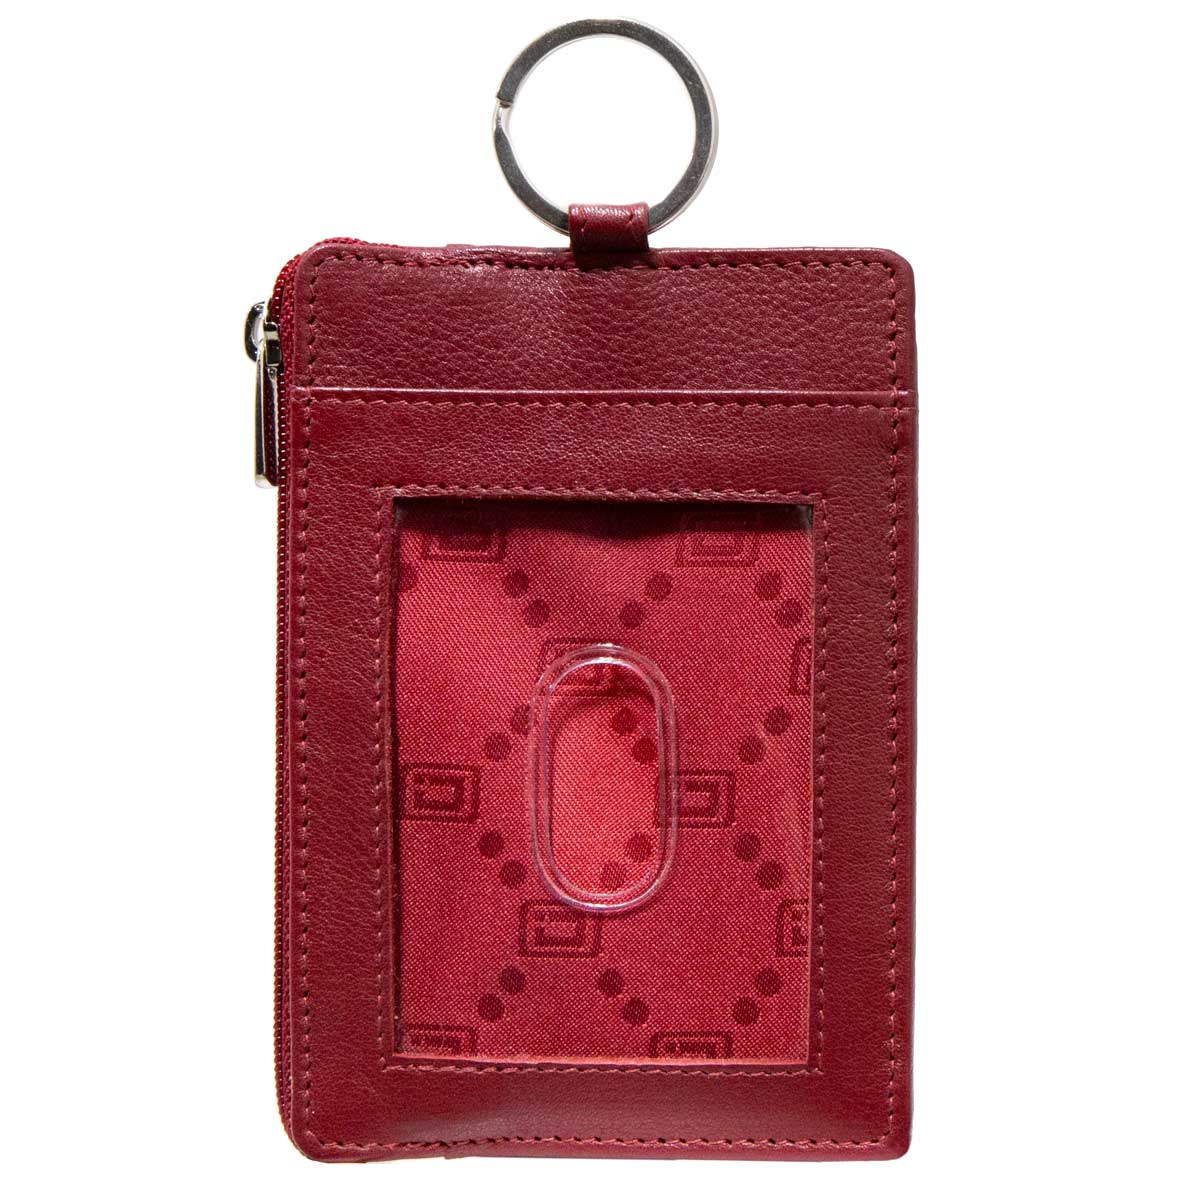 RFID Wallet Key Ring Mini - Protective Wallet for Credit Cards - RFID Blocking L